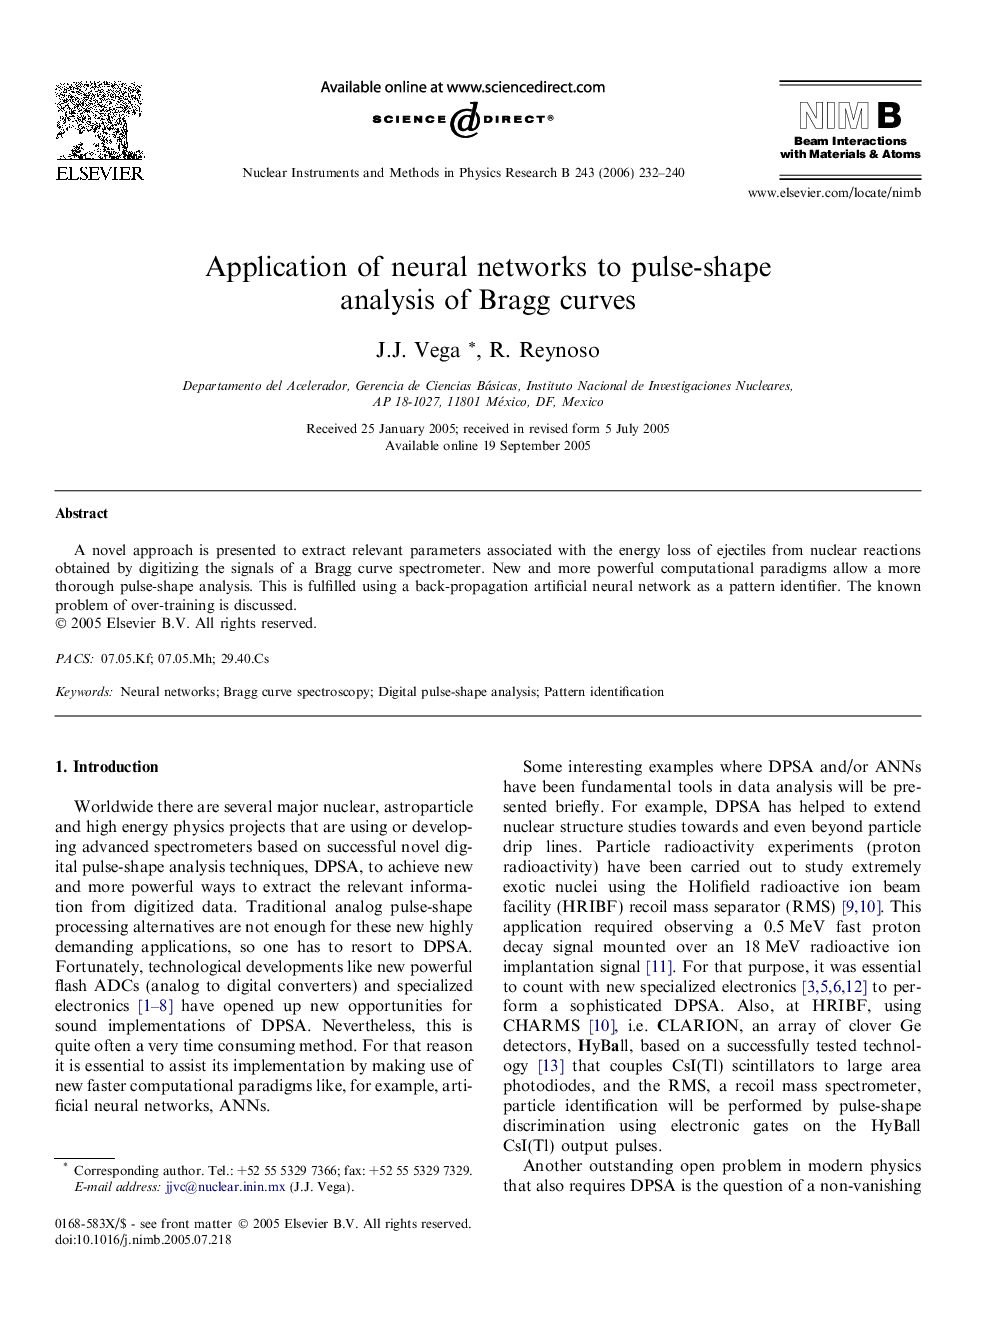 Application of neural networks to pulse-shape analysis of Bragg curves